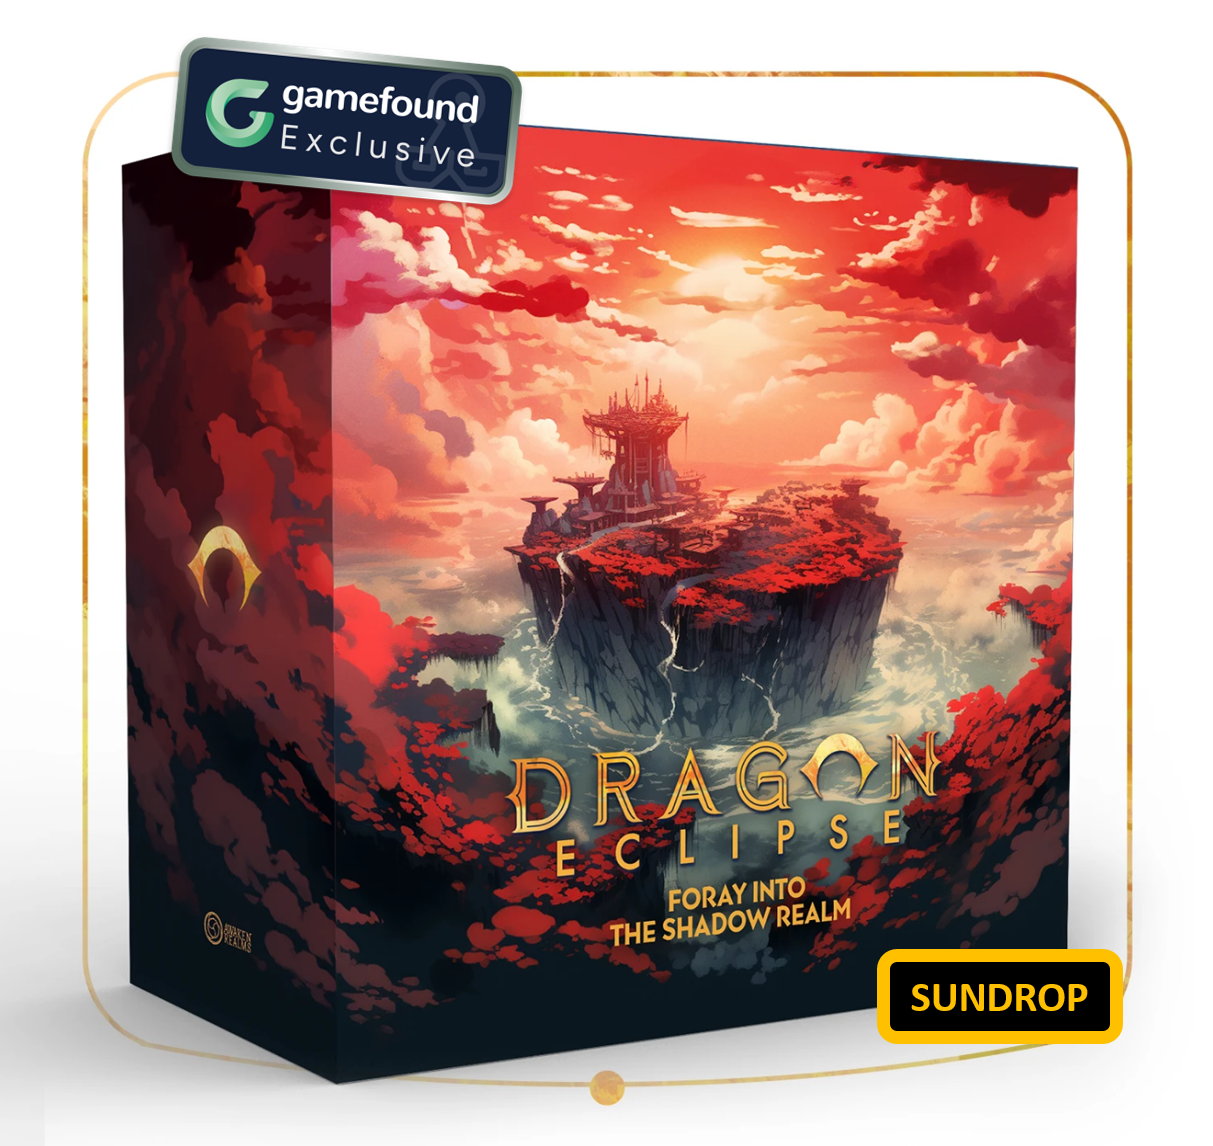 Gamefound Exclusive Dragon Eclipse Board Game Foray Into The Shadow Realm Expansion, Sundrop Edition